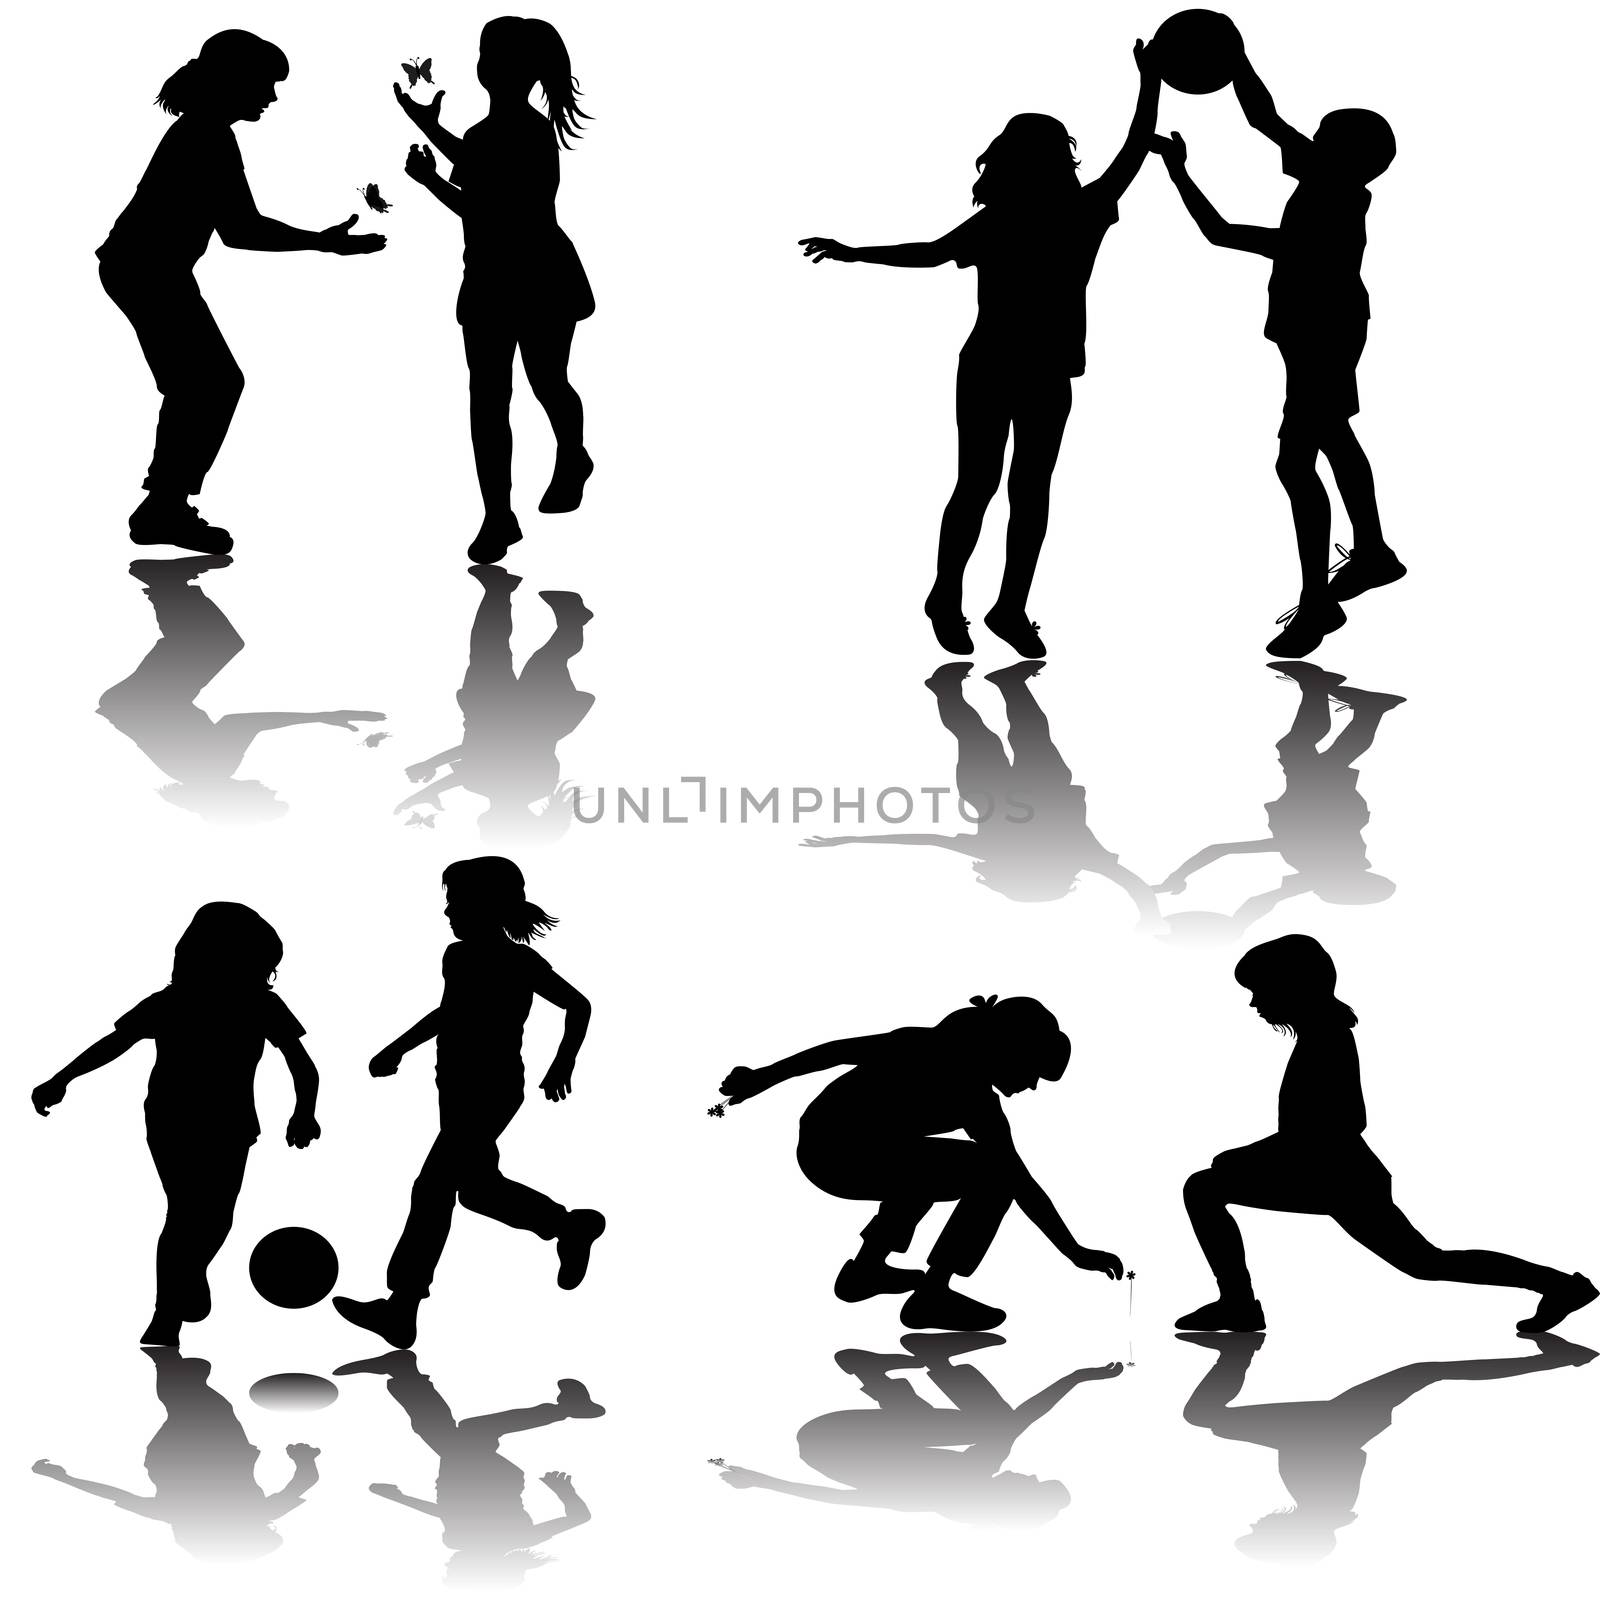 Group of playing children silhouettes by hibrida13